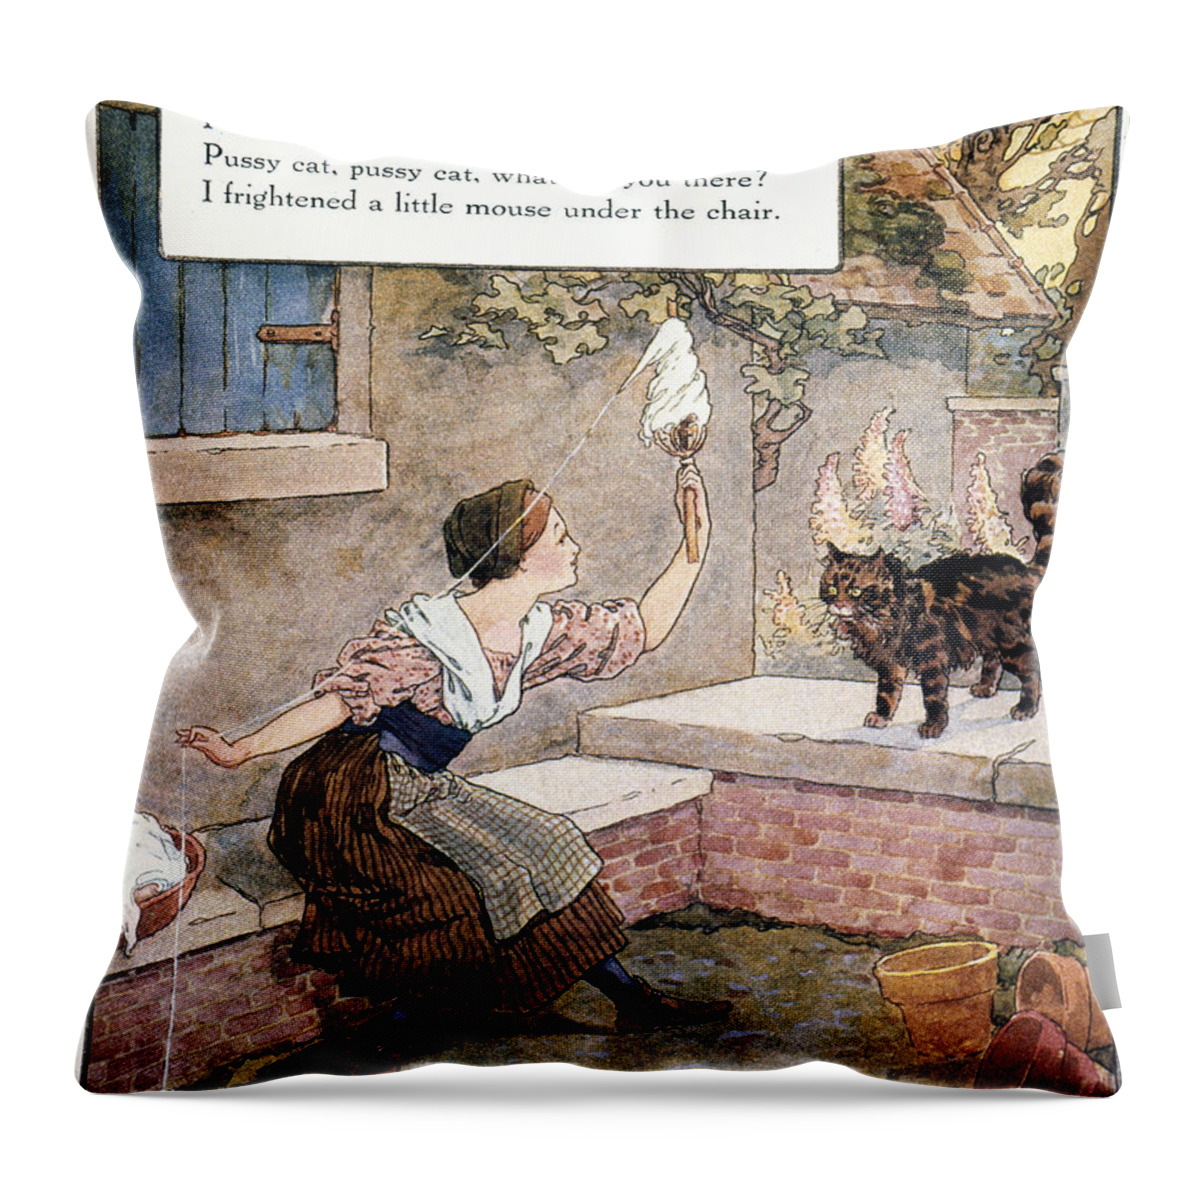 1915 Throw Pillow featuring the photograph Richardson: Pussy Cat by Granger